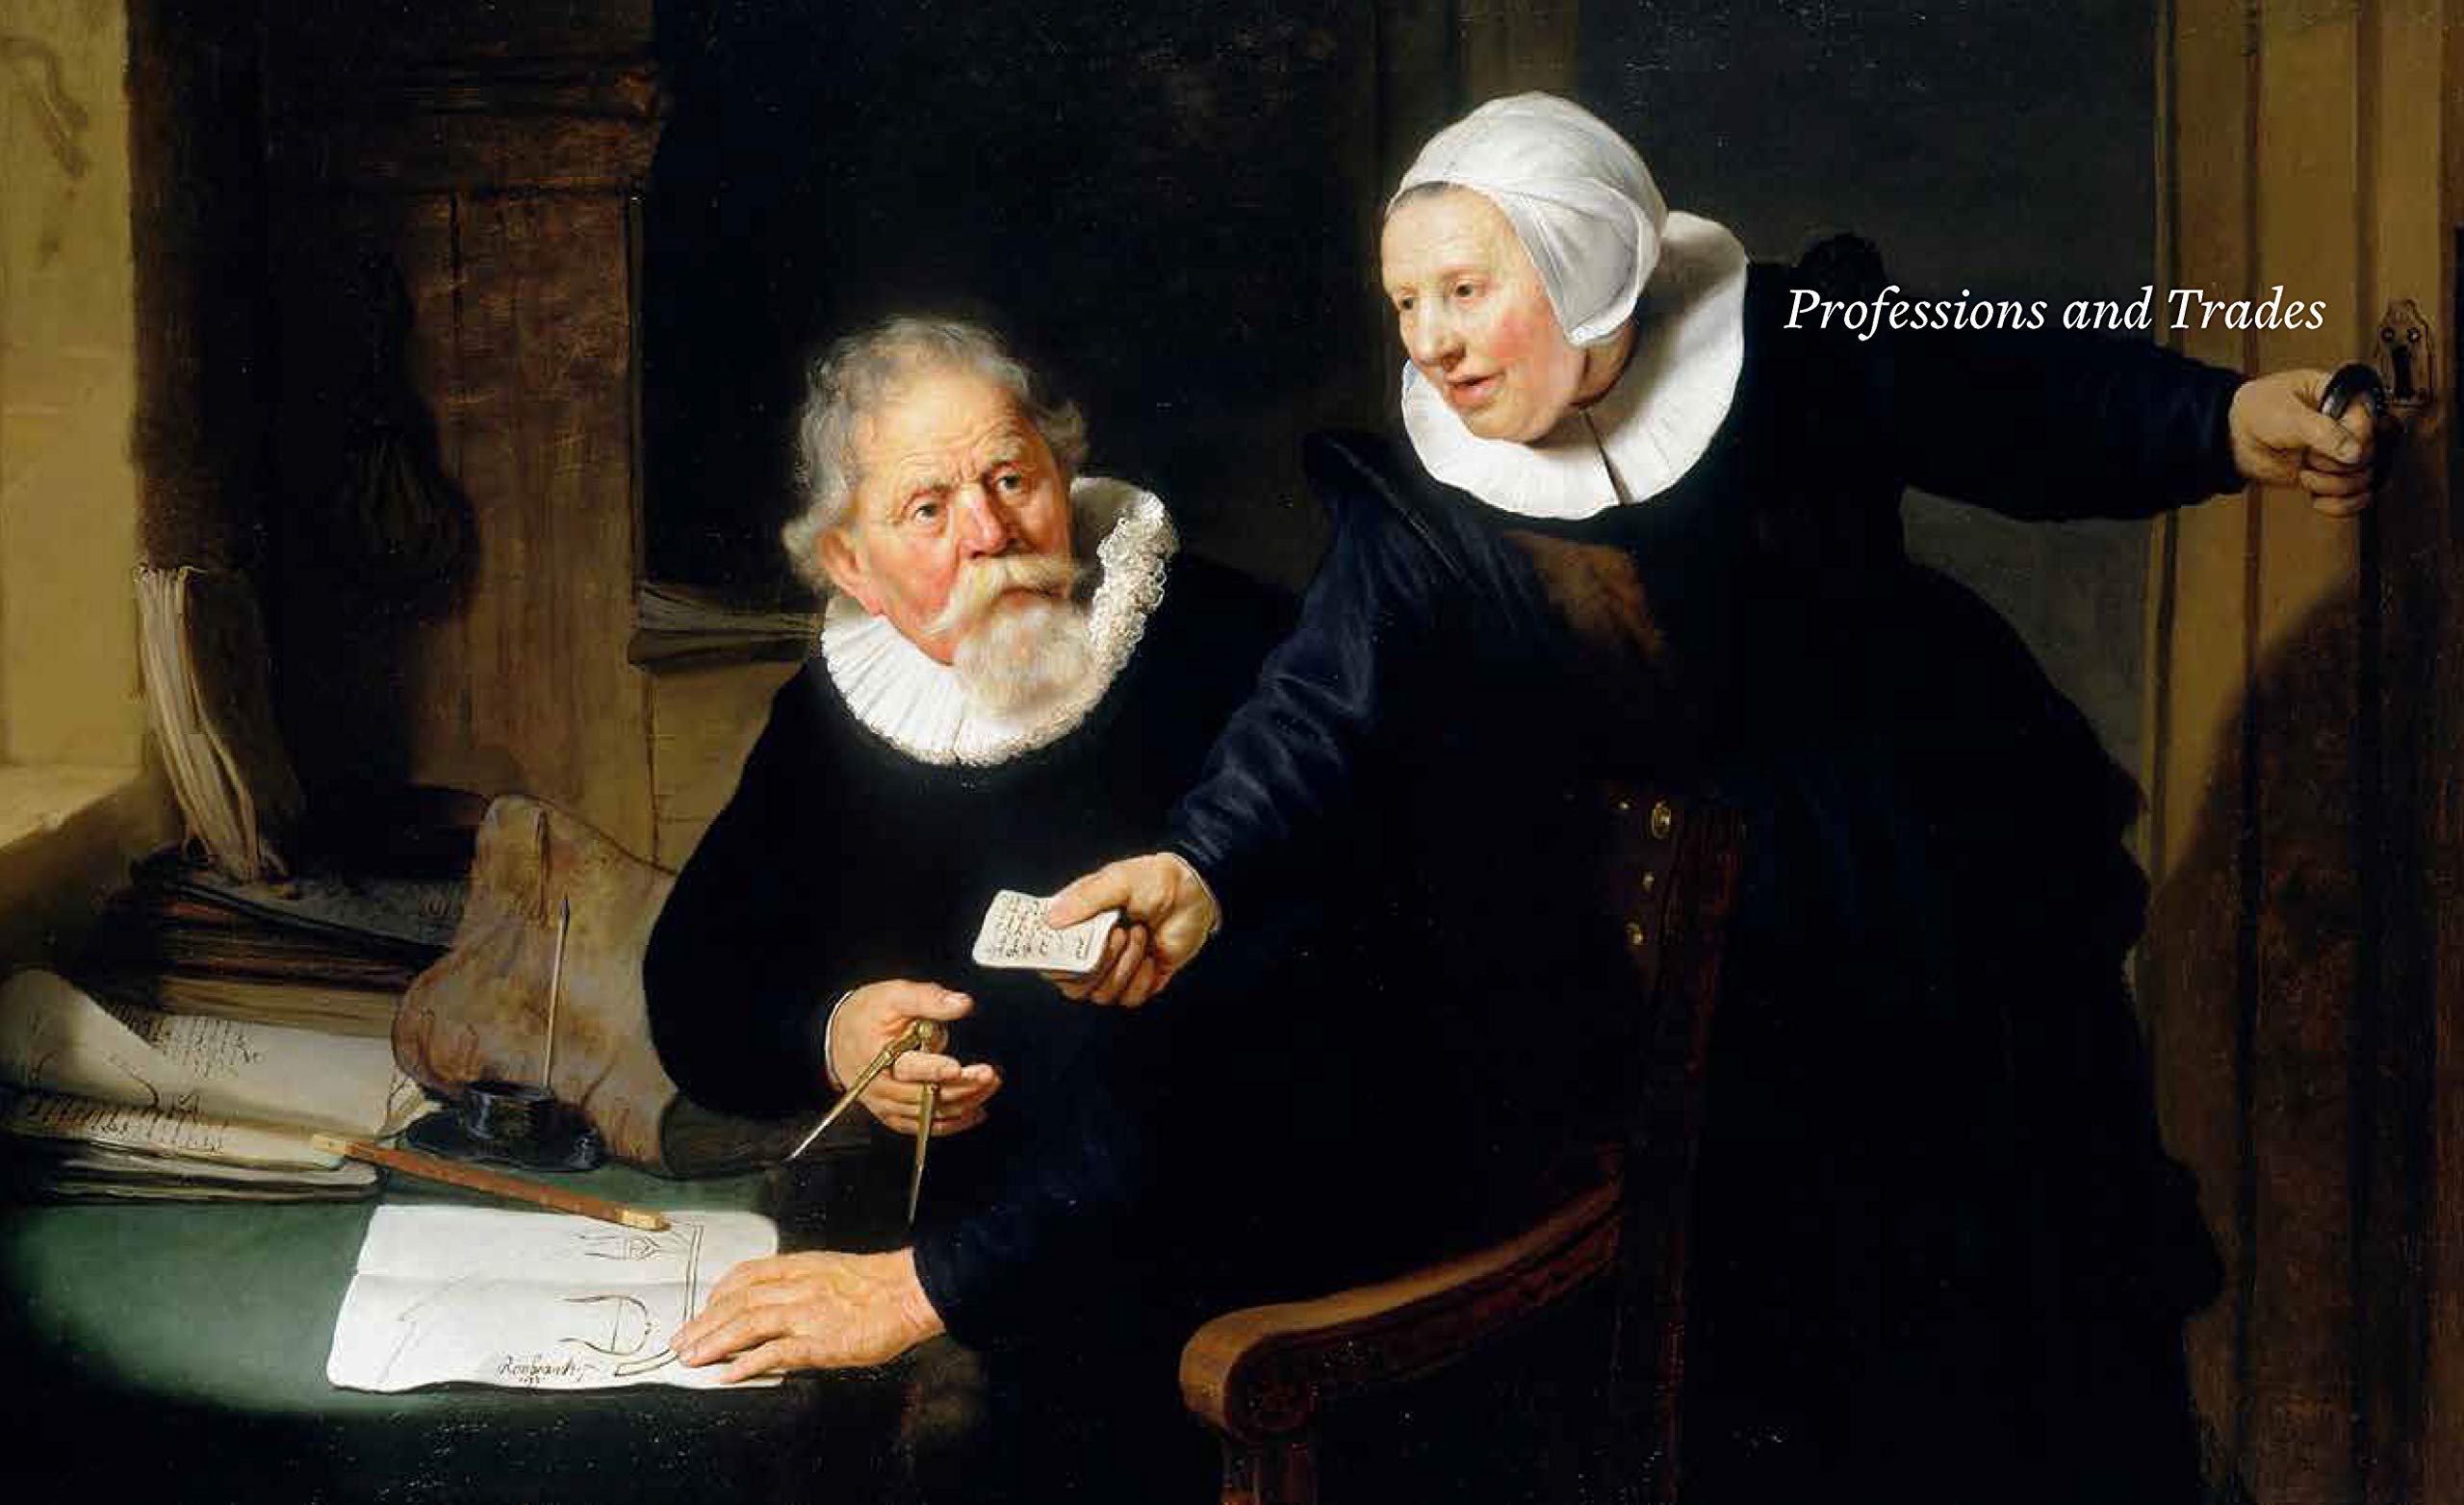 Class Distinctions: Dutch Painting in the Age of Rembrandt and Vermeer